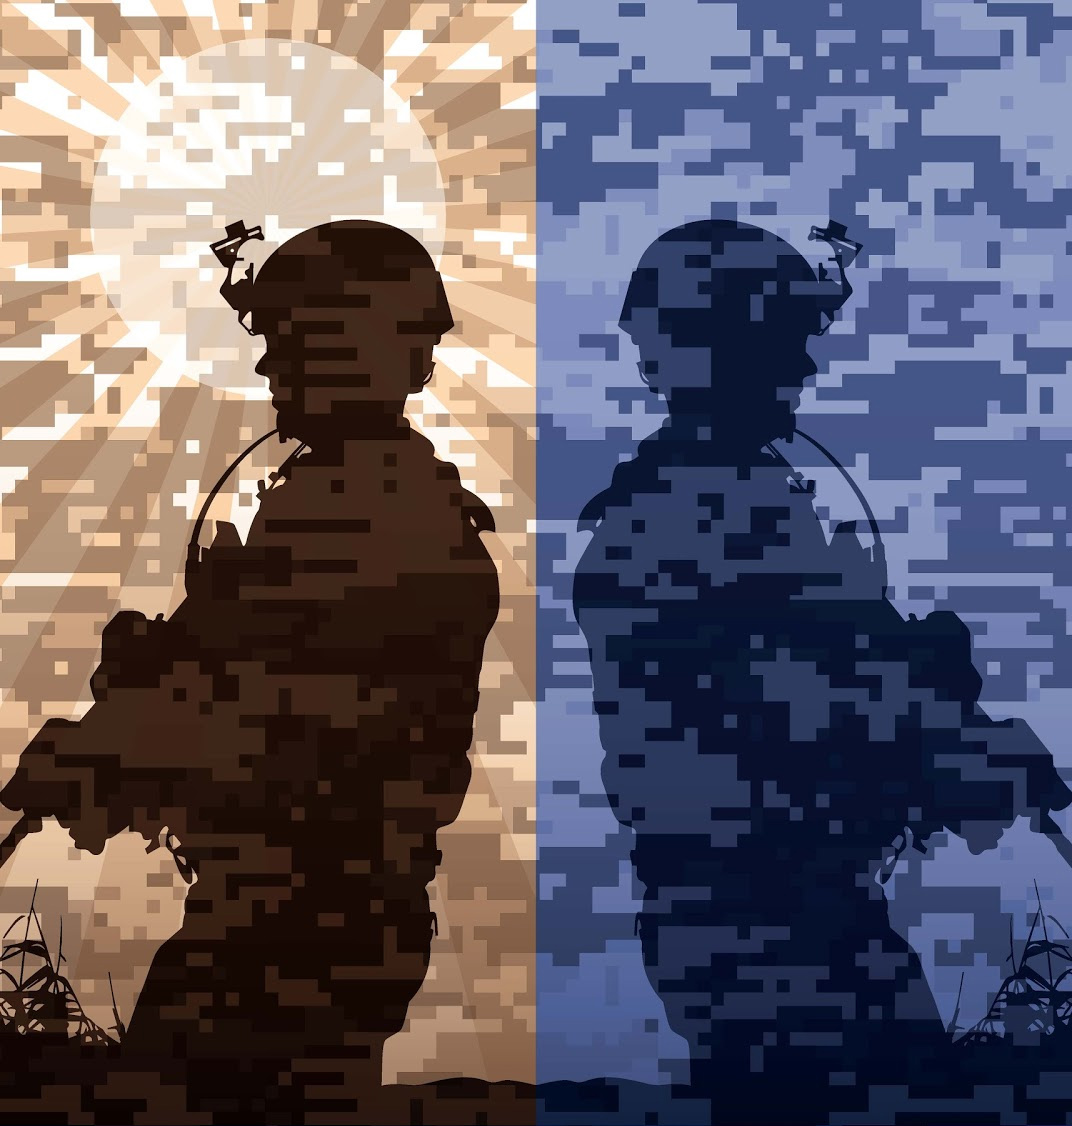 Image of soldiers